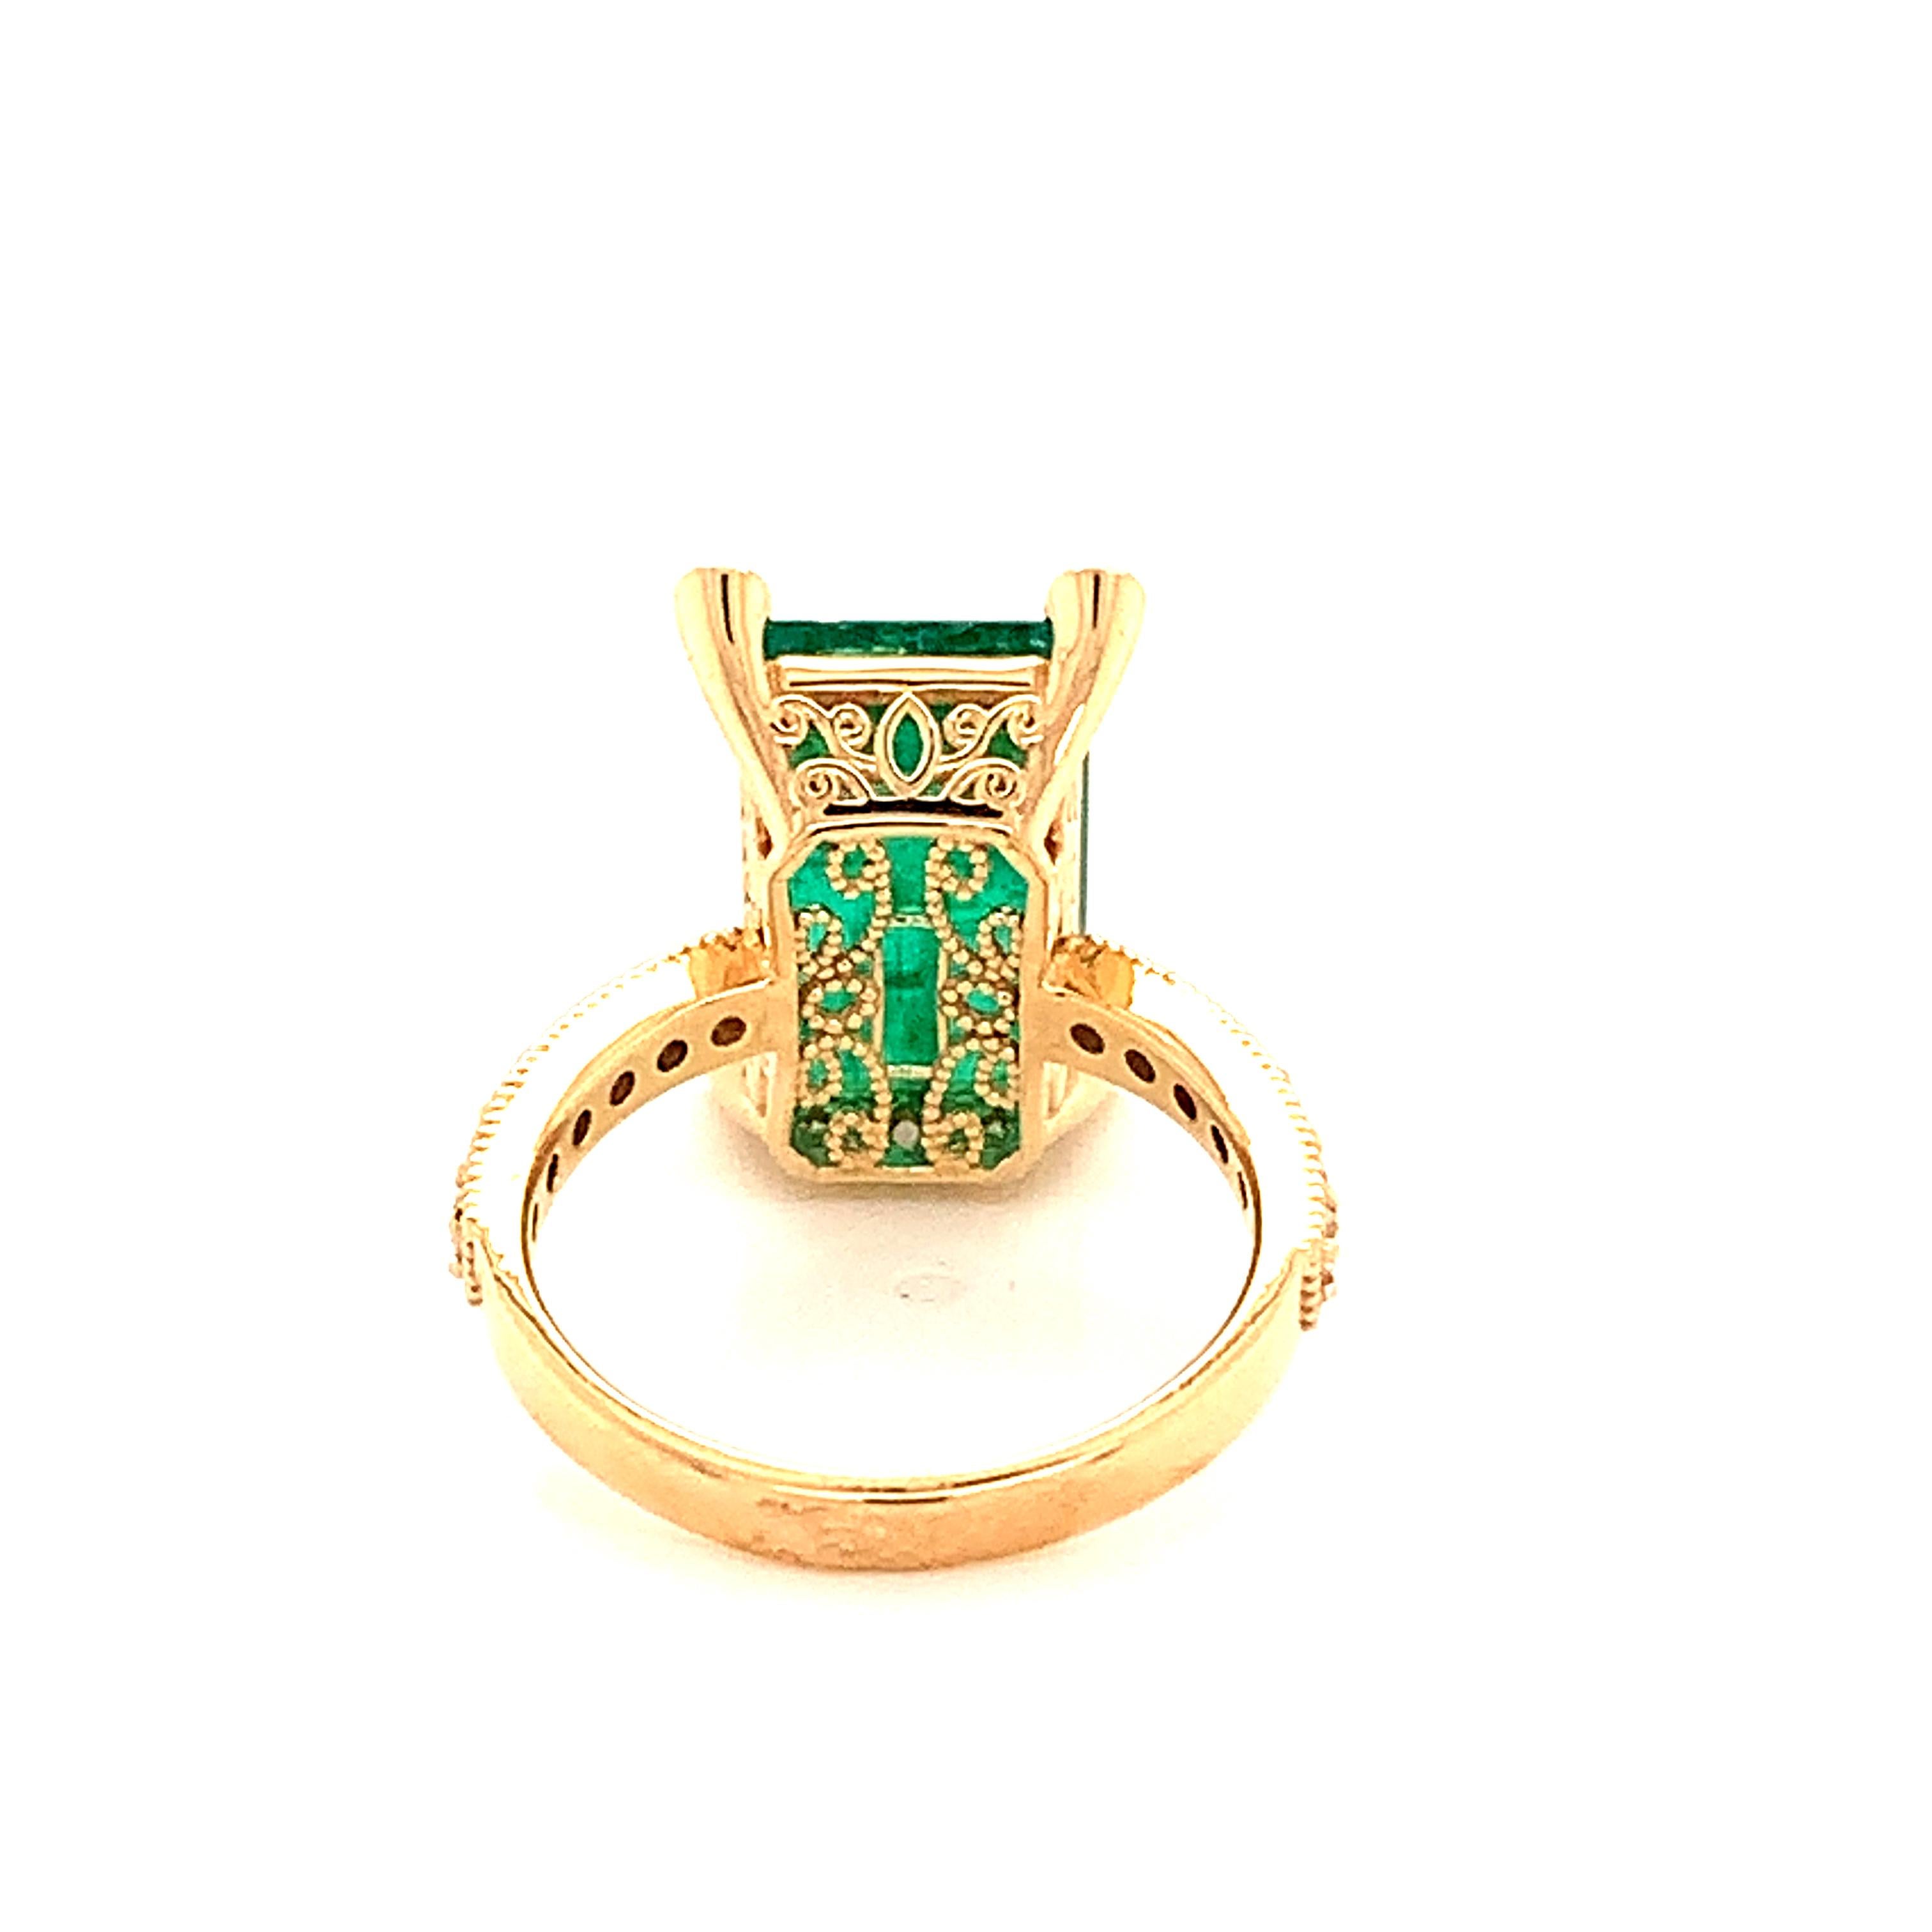 Natural Emerald Diamond Ring 14k Gold 4.37 TCW GIA Certified In New Condition For Sale In Brooklyn, NY